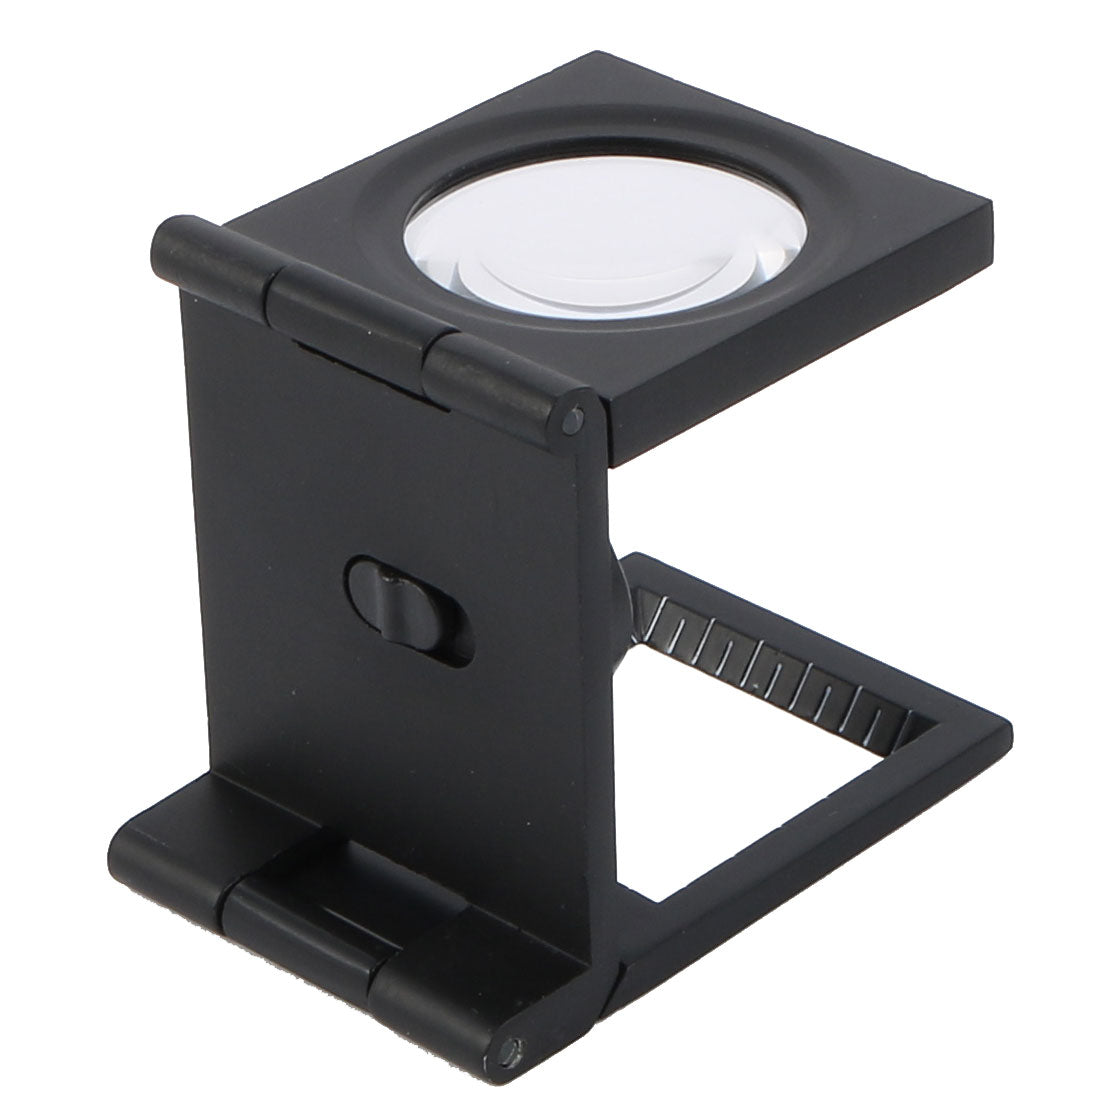 uxcell Uxcell Portable Magnifier Illuminated Magnifier Magnifying Glass Lens 10X W LED Light